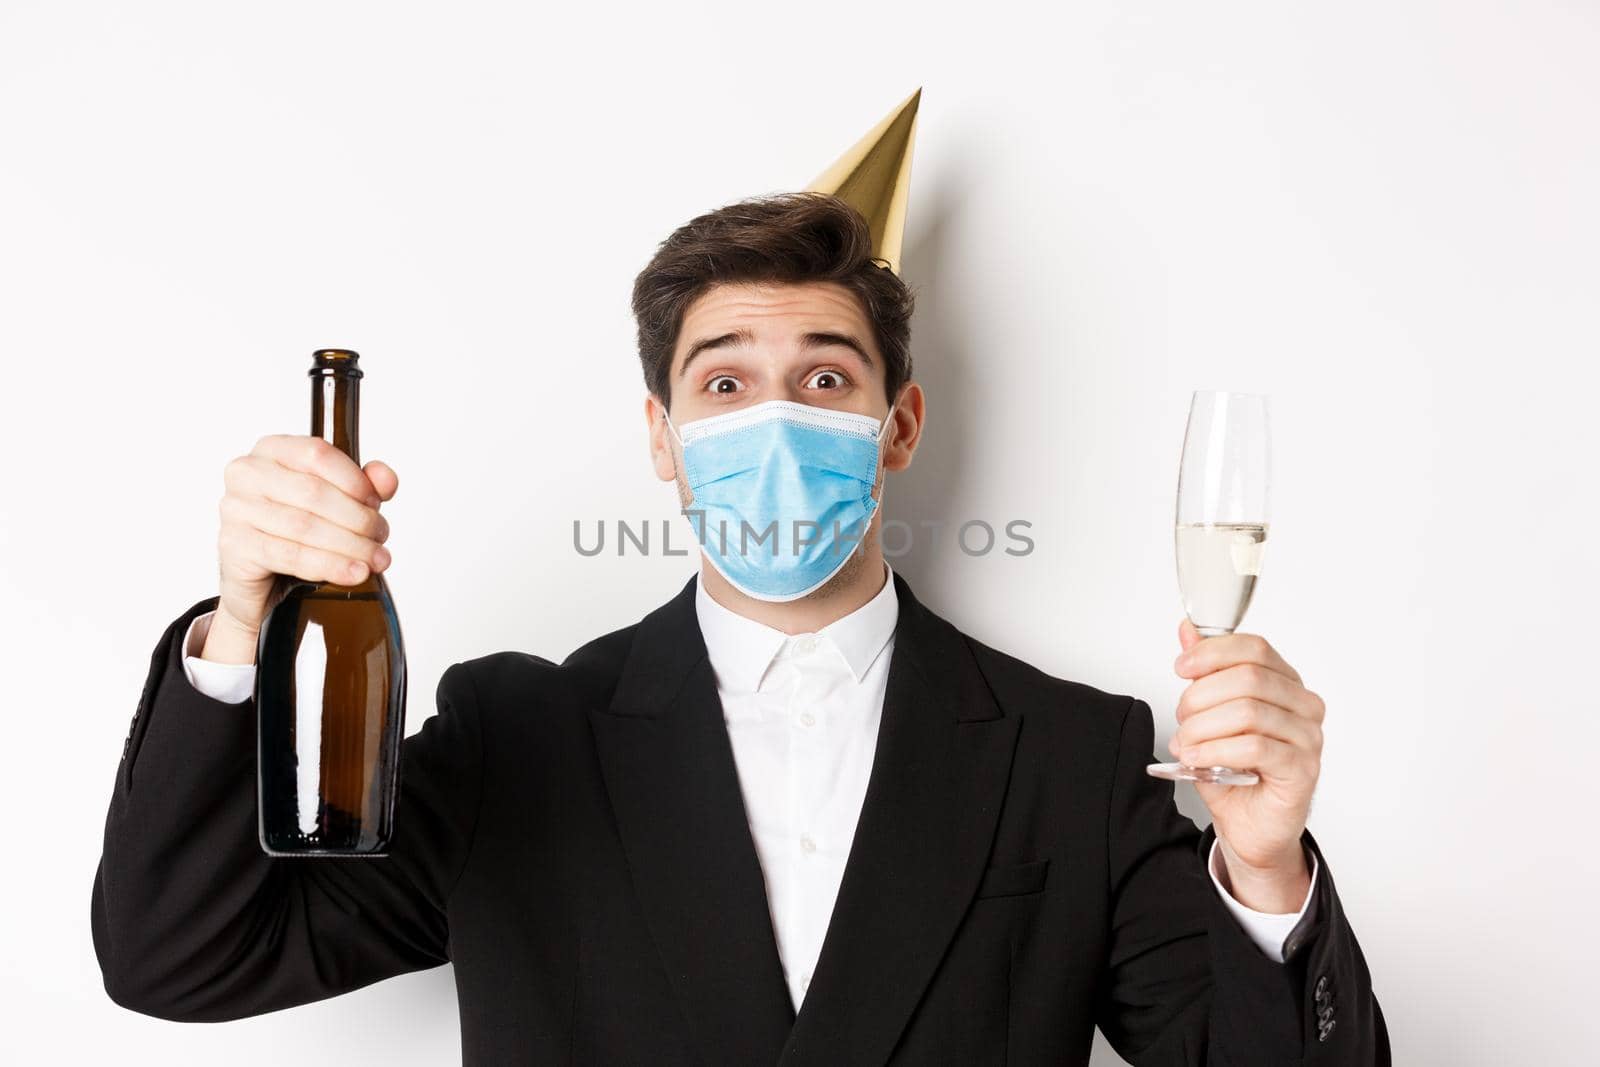 Concept of party during covid-19. Close-up of handsome man in suit, funny hat and medical mask, holding bottle of champagne, celebrating new year on social distancing.